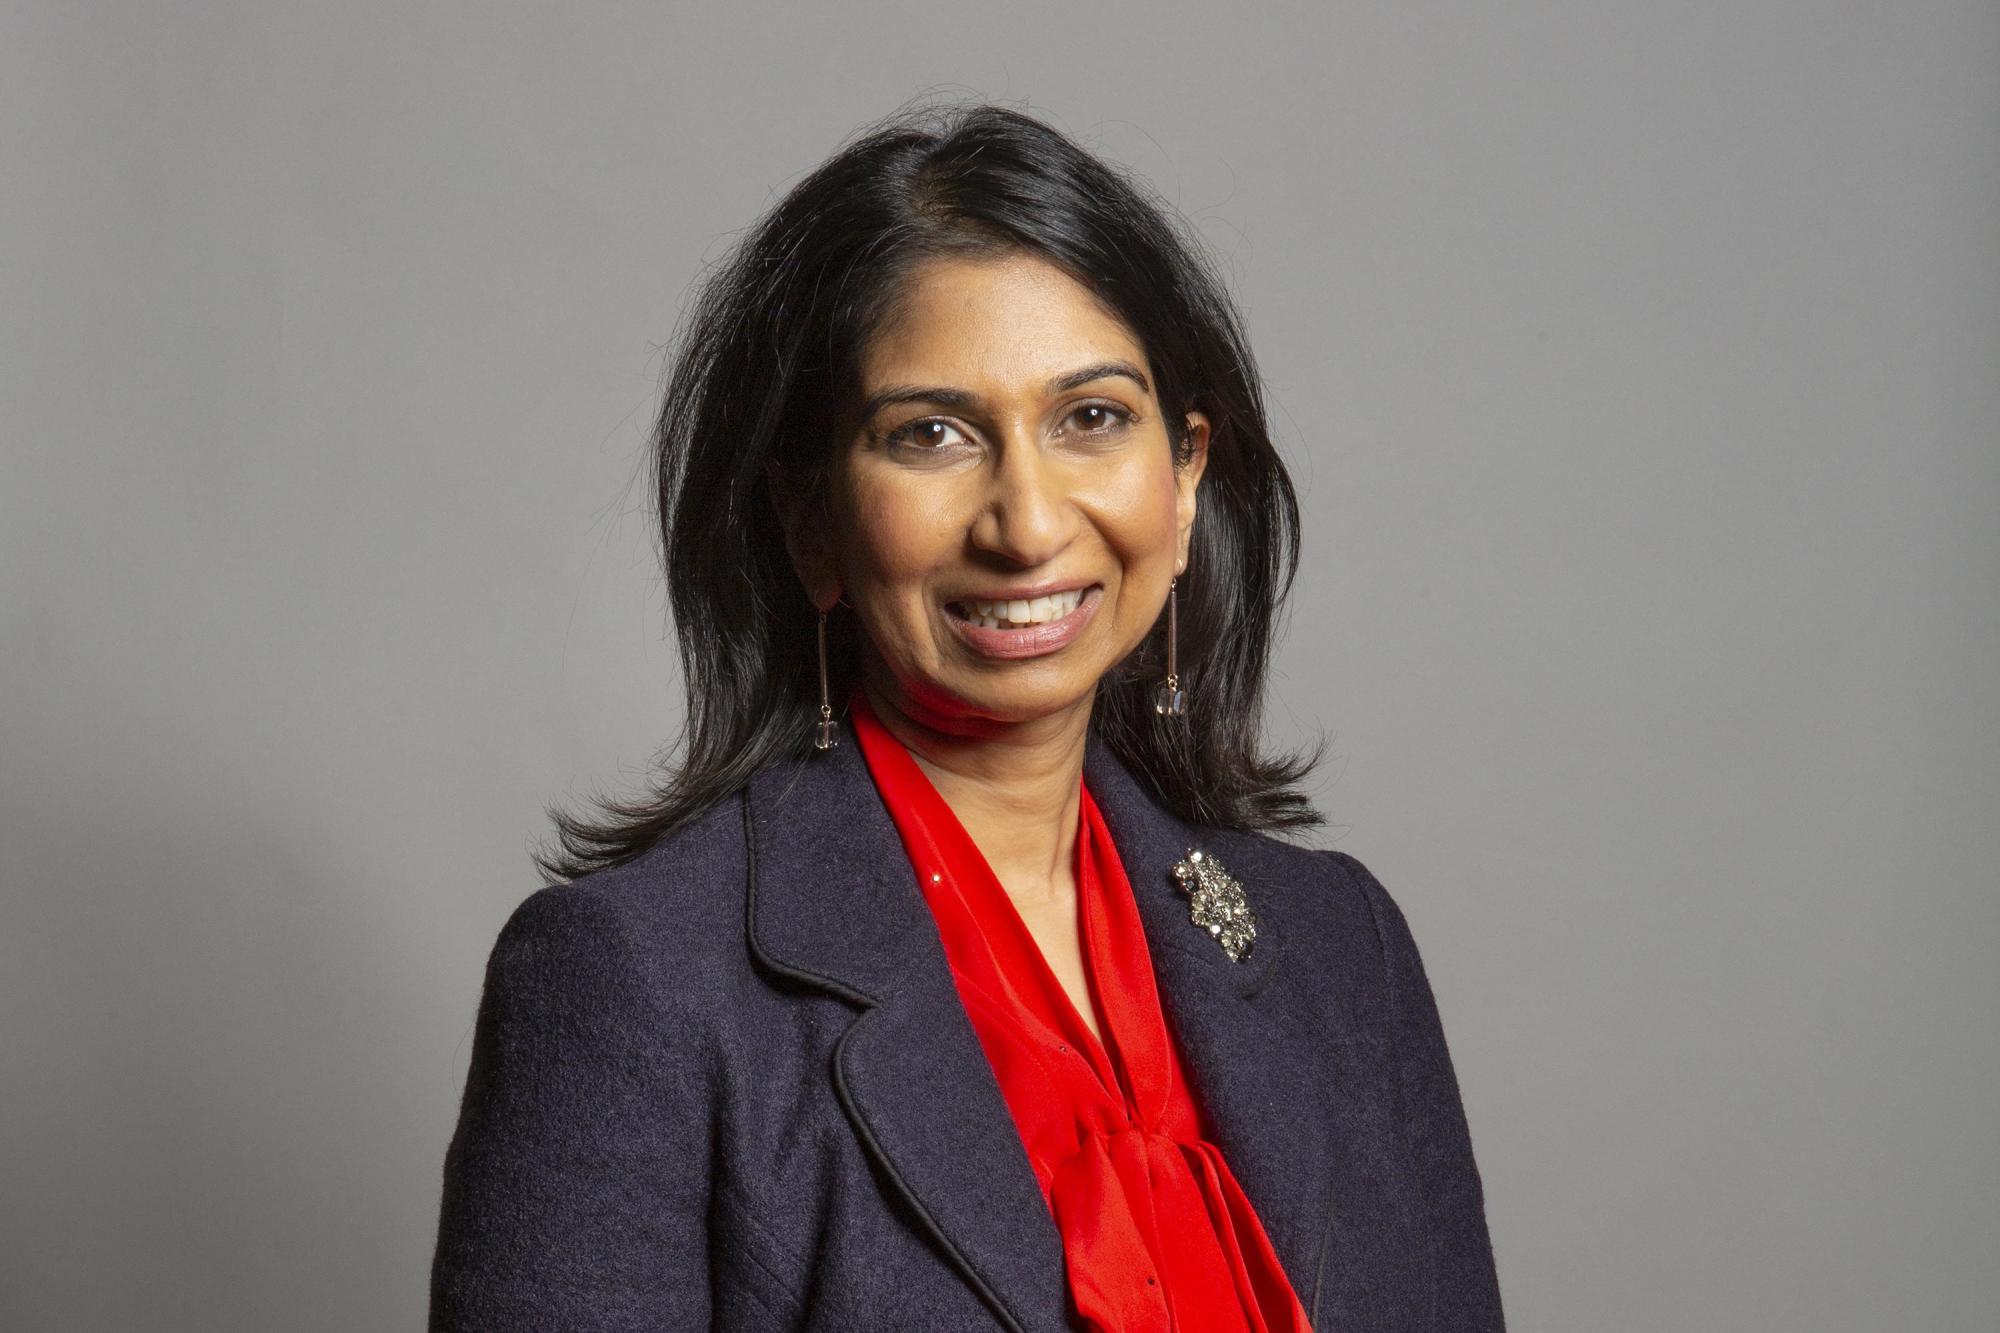 British Cleaning Council ‘Infuriated’ by Suella Braverman Speech